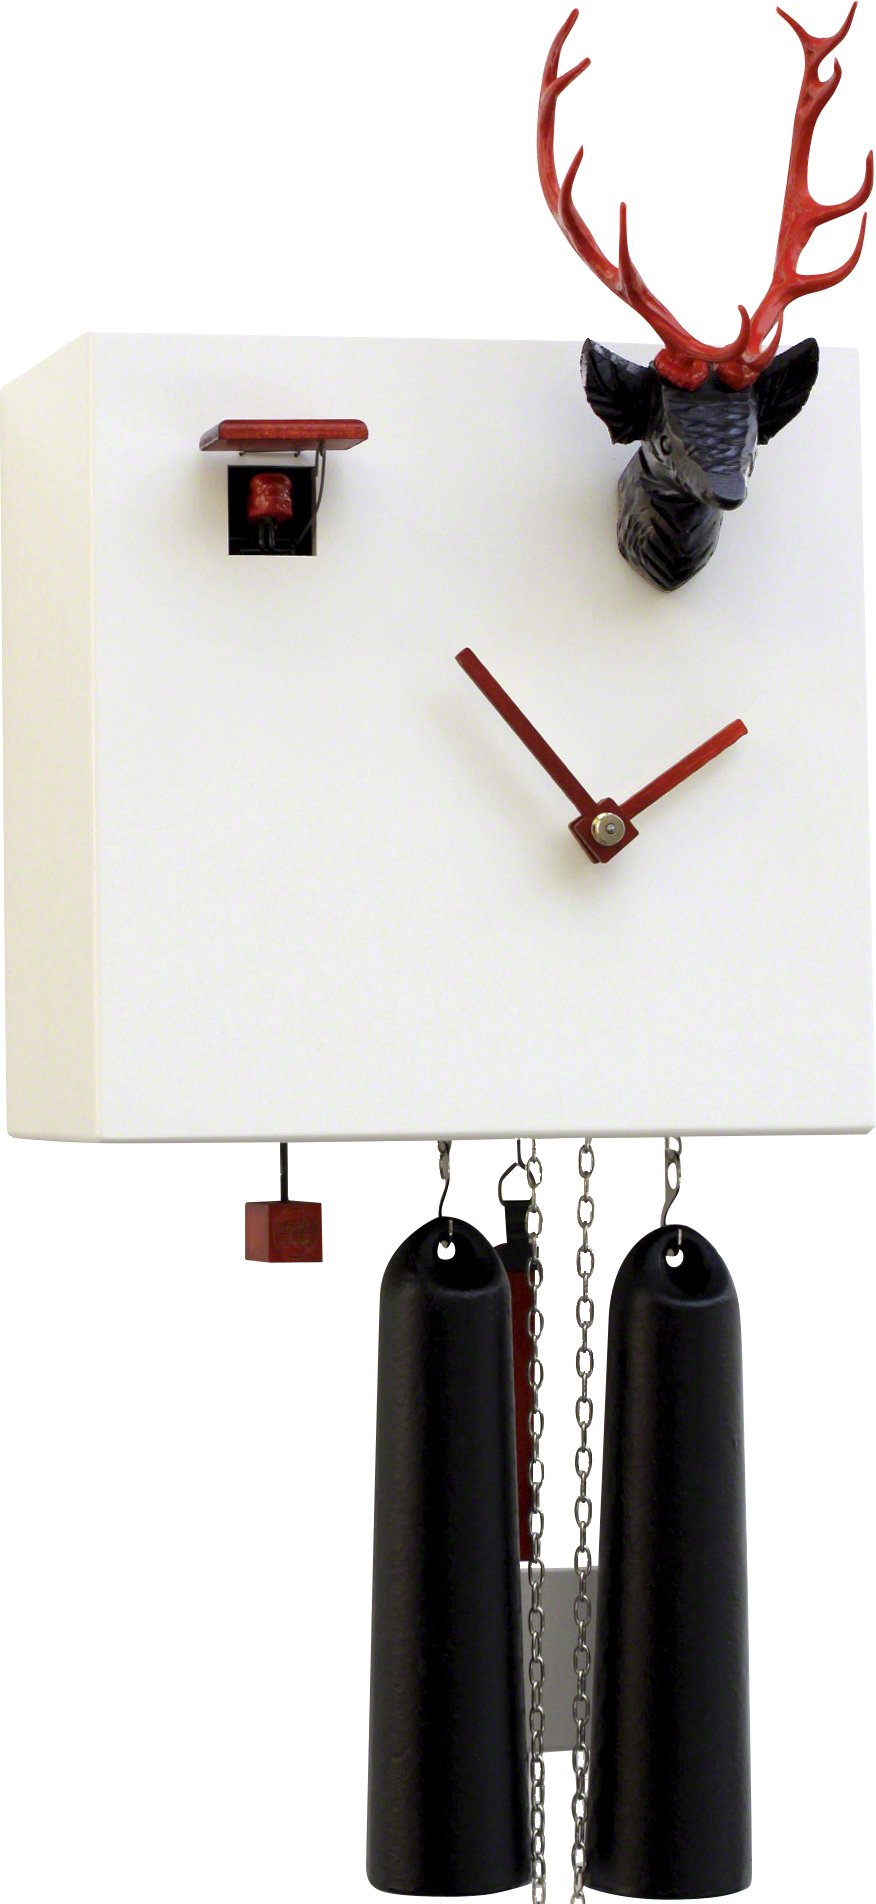 Cuckoo Clock 8-day-movement Modern-Art-Style 20cm by Rombach & Haas